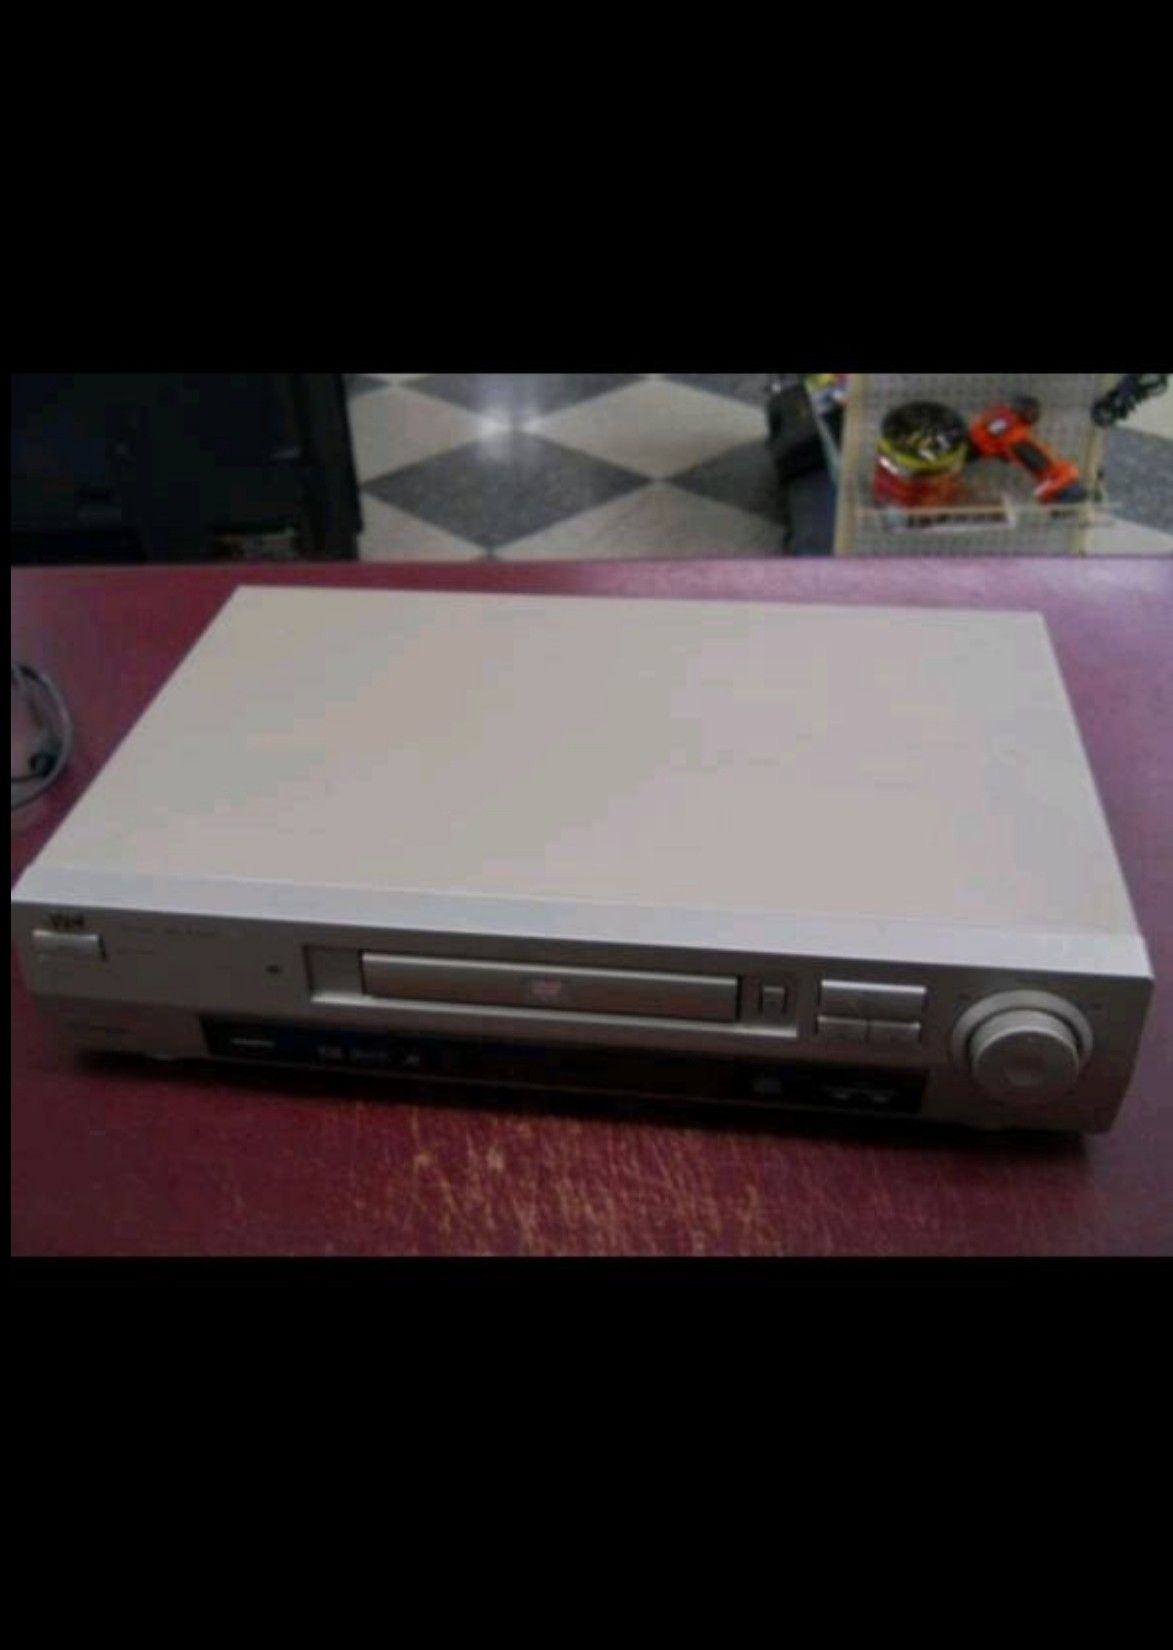 JVC DVD / CD PLAYER - NOT WORKING / PARTS OR REPAIR